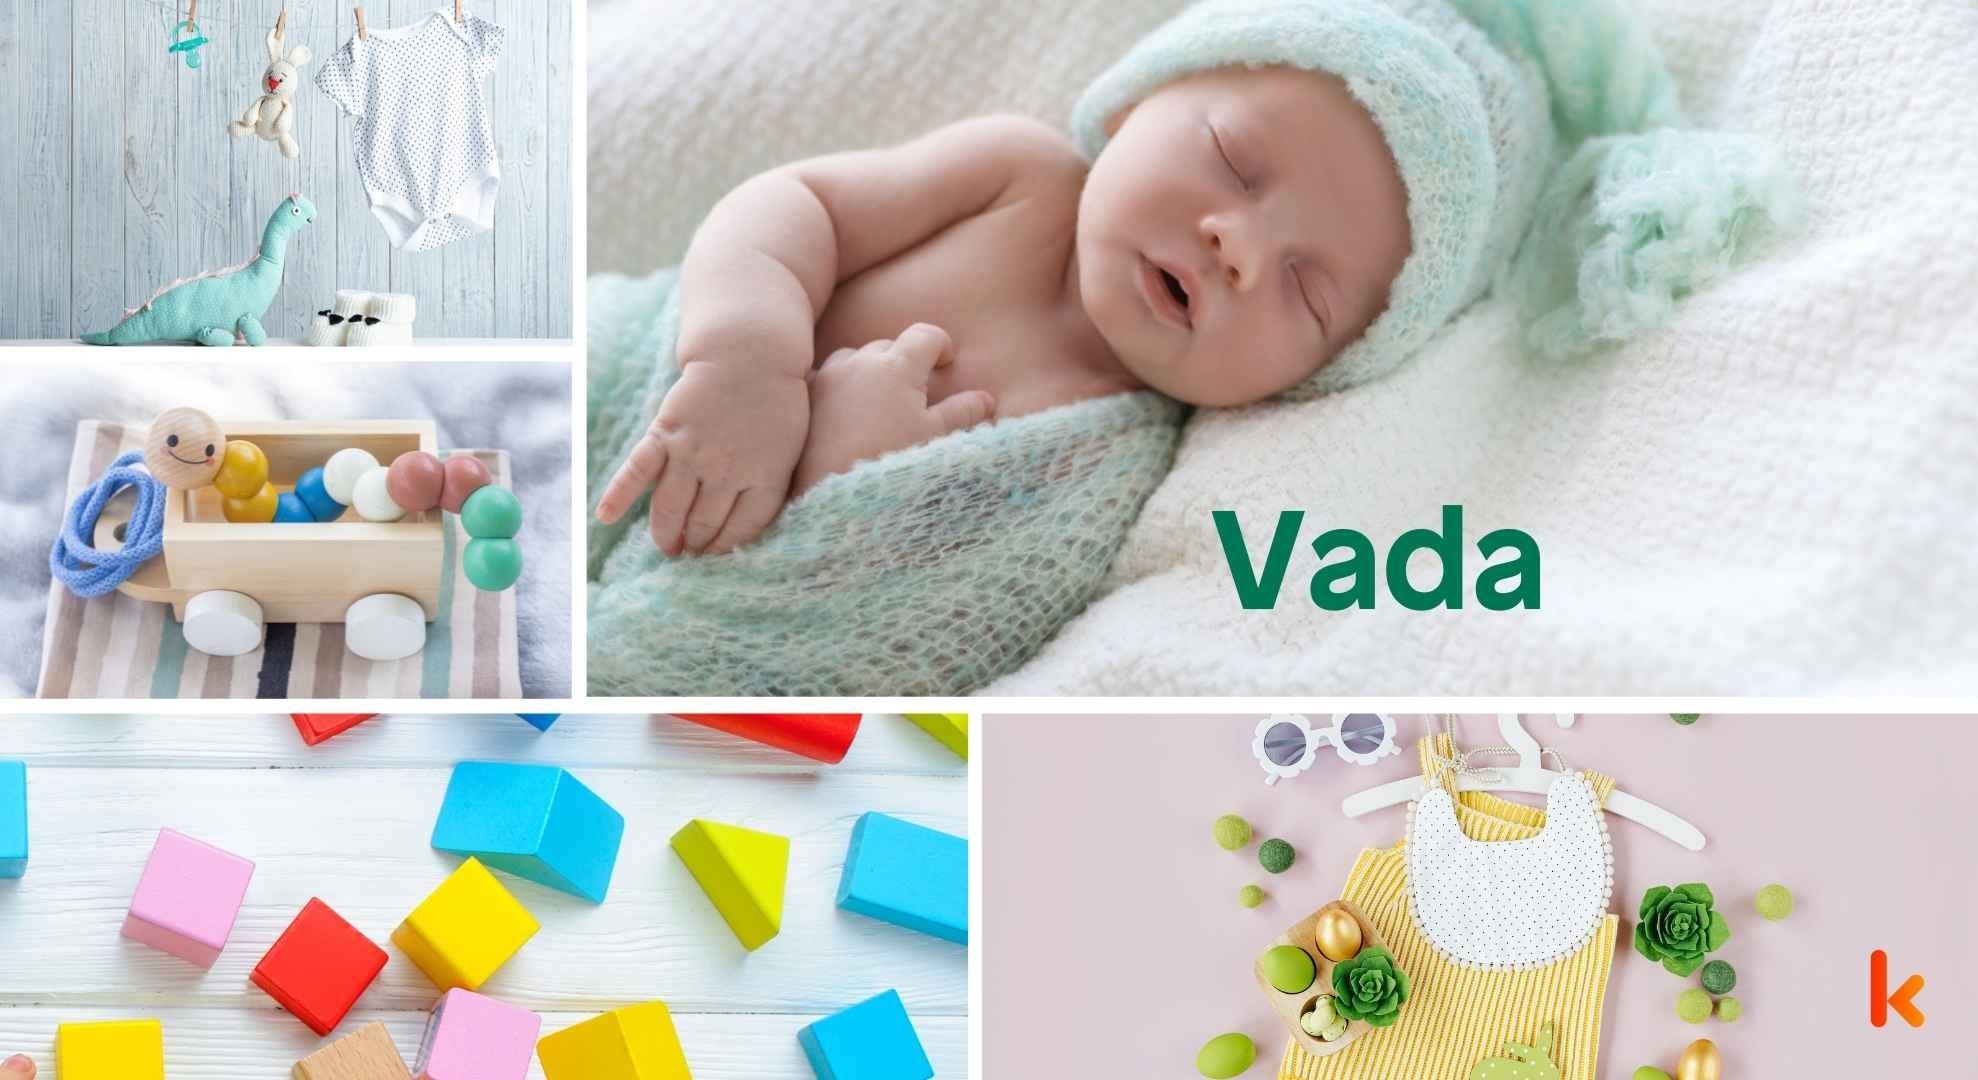 Meaning of the name Vada